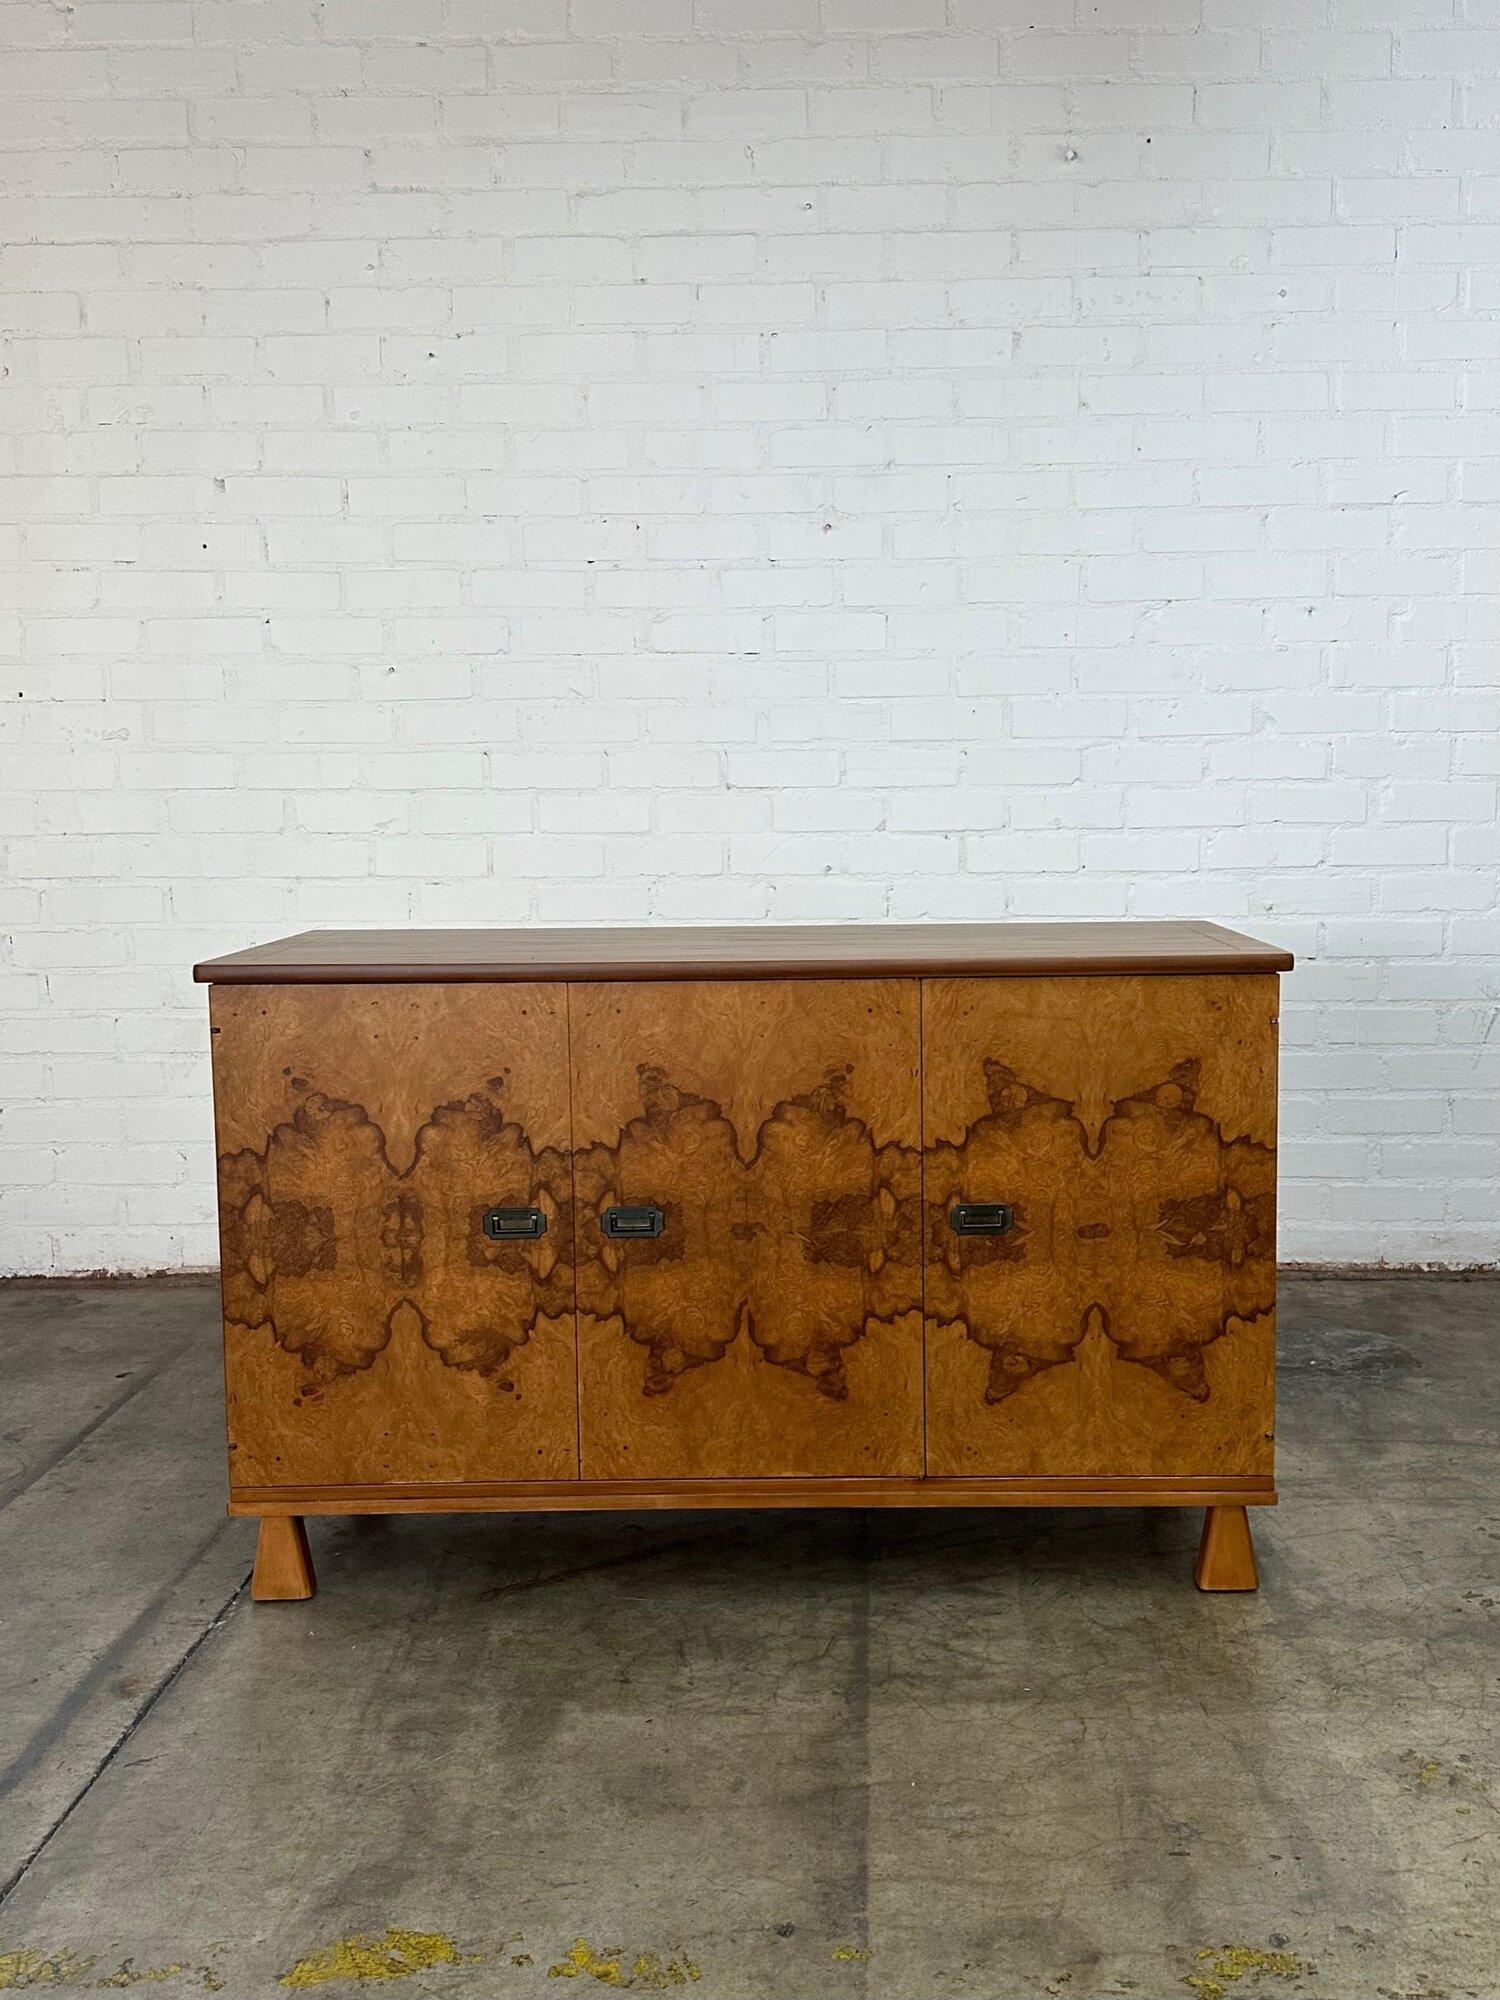 W56 D19 H33

Burlwood and oak credenza fully refinished and structurally sound. Item features trapezoid legs and brass hardware.

Circa 1970’s